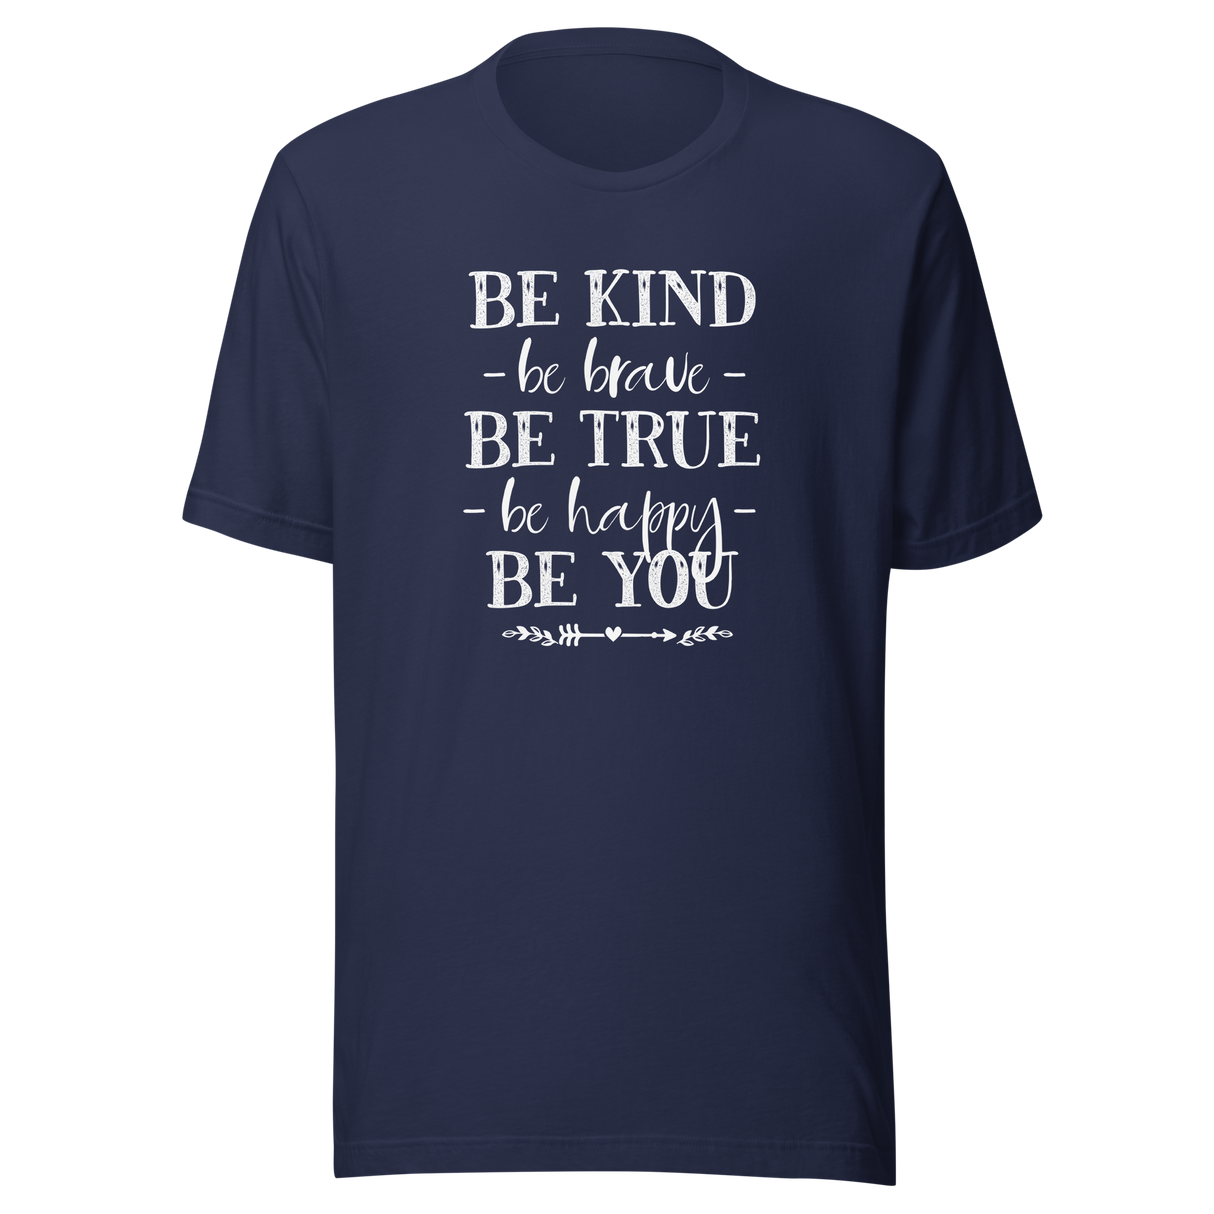 be-kind-be-brave-be-true-be-happy-be-you-life-tee-kindness-t-shirt-bravery-tee-truth-t-shirt-happiness-tee#color_navy